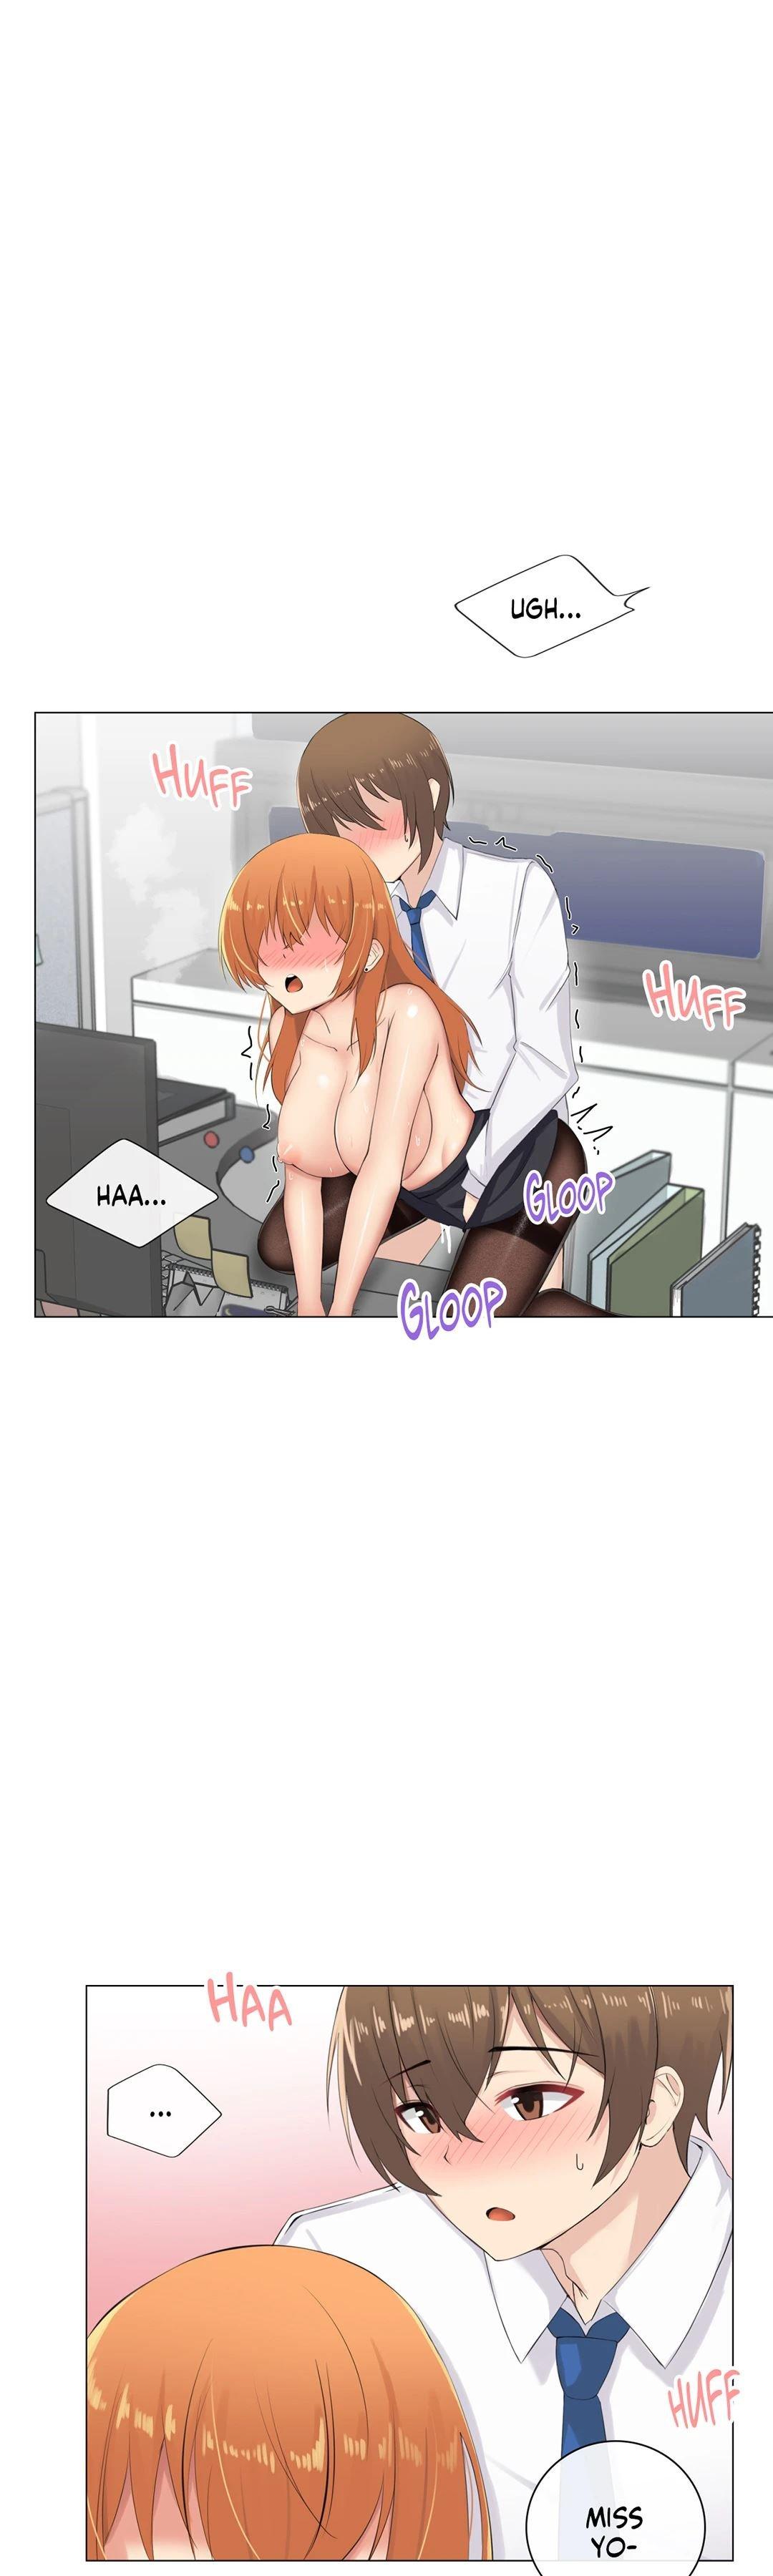 [Dumangoon, 130F] Sexcape Room: Pile Up Ch.9/9 [English] [Manhwa PDF] Completed 239